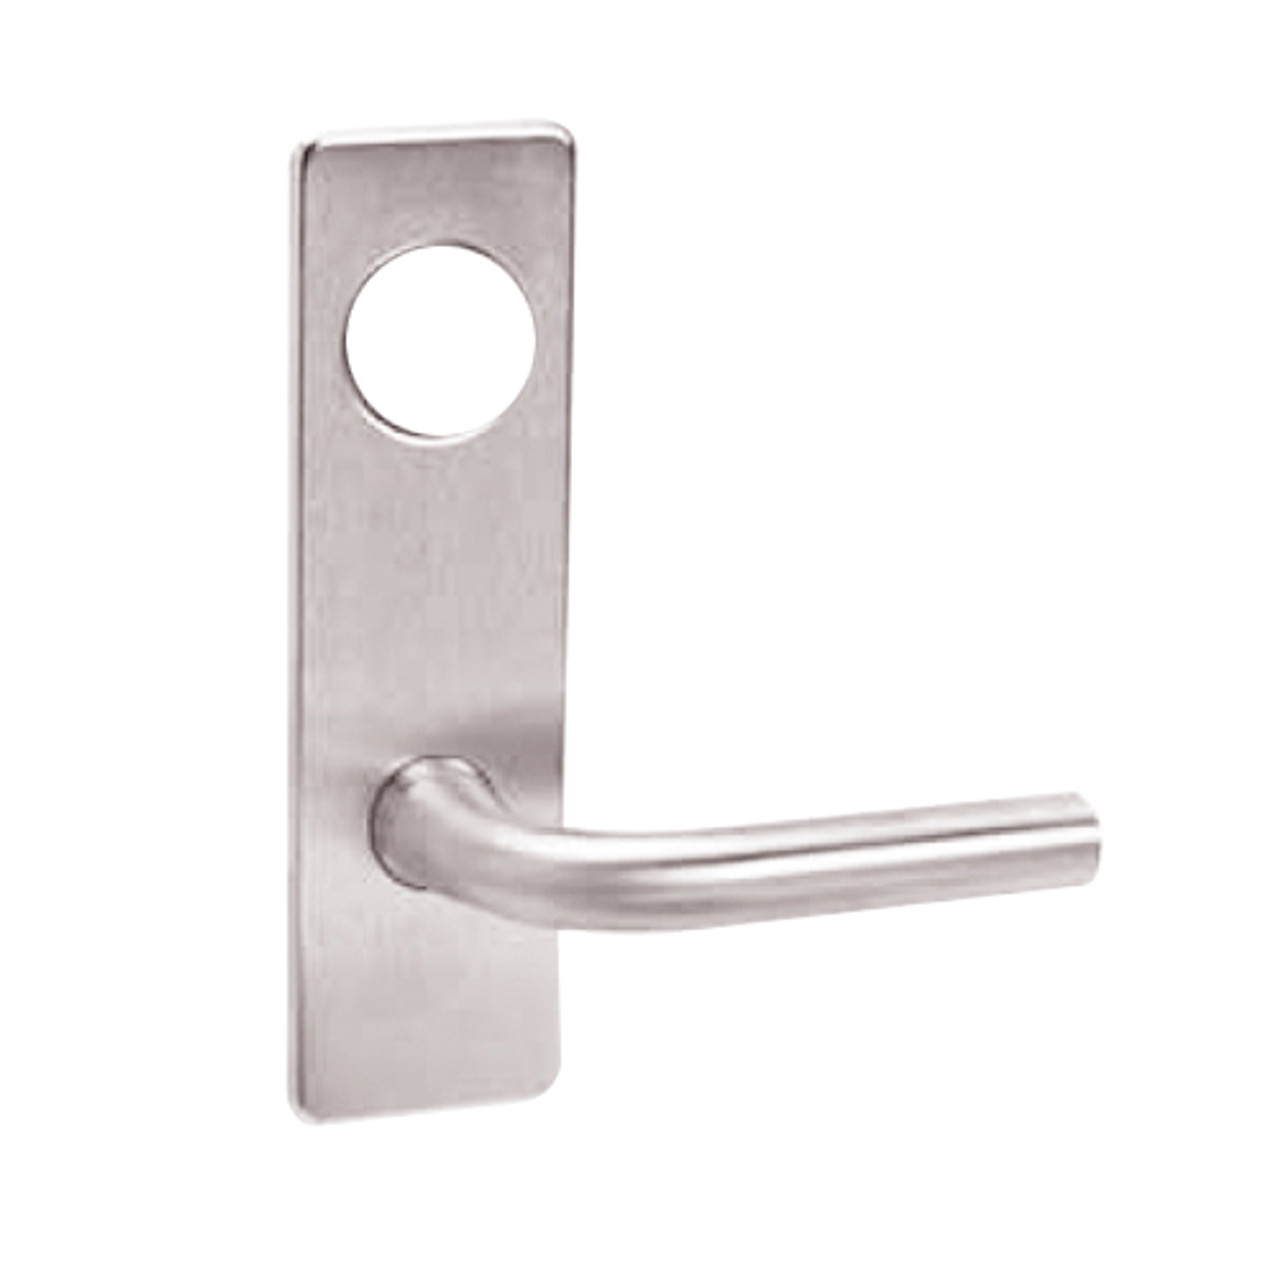 ML2059-RSM-629-CL6 Corbin Russwin ML2000 Series IC 6-Pin Less Core Mortise Security Storeroom Locksets with Regis Lever in Bright Stainless Steel